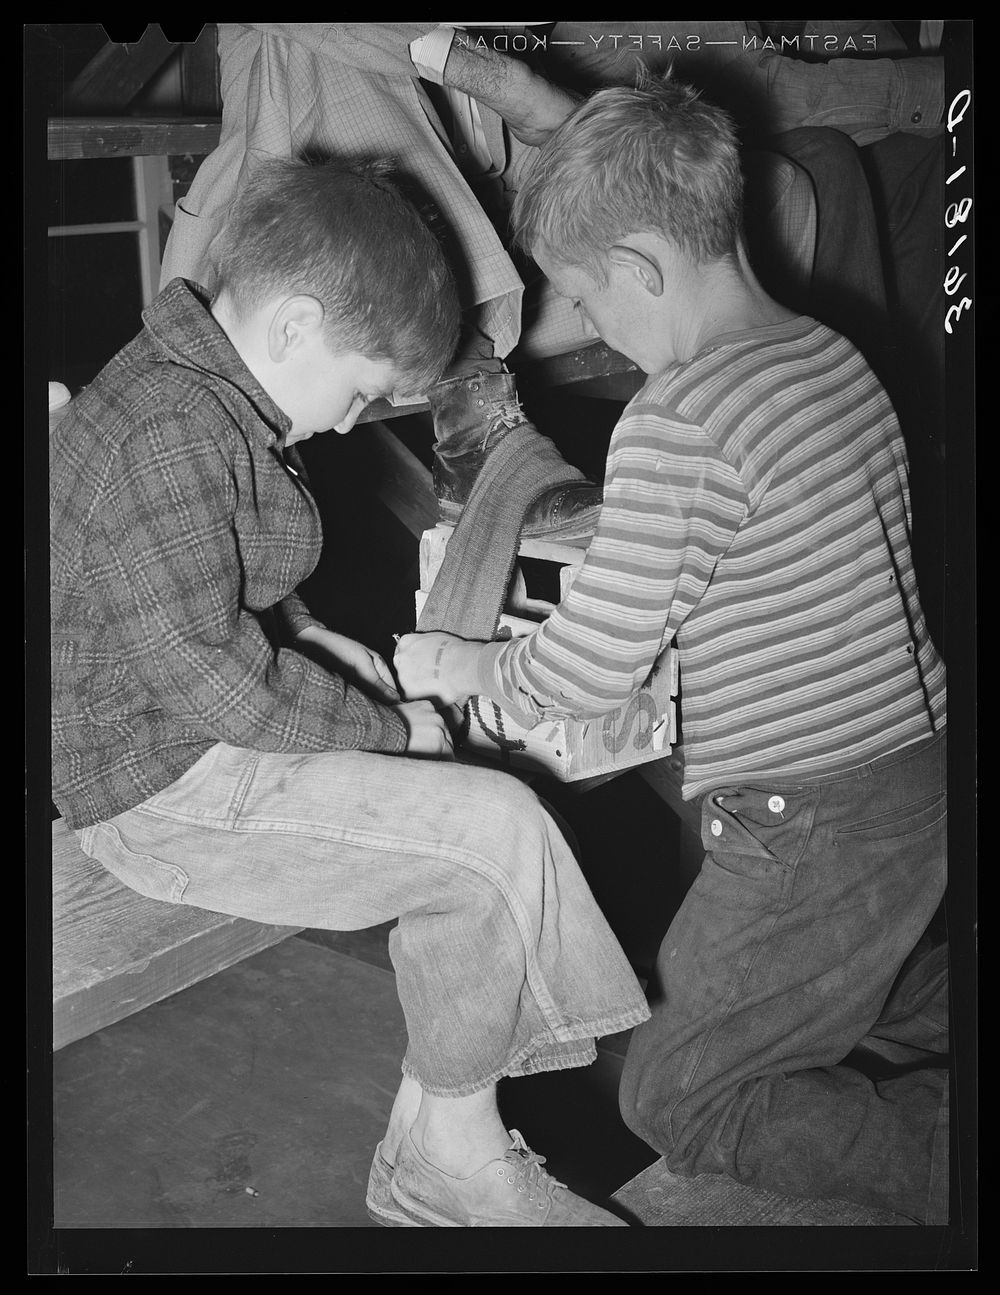 Children of migrant agricultural workers make some spending money by shining shoes at the Agua Fria labor camp. Arizona by…